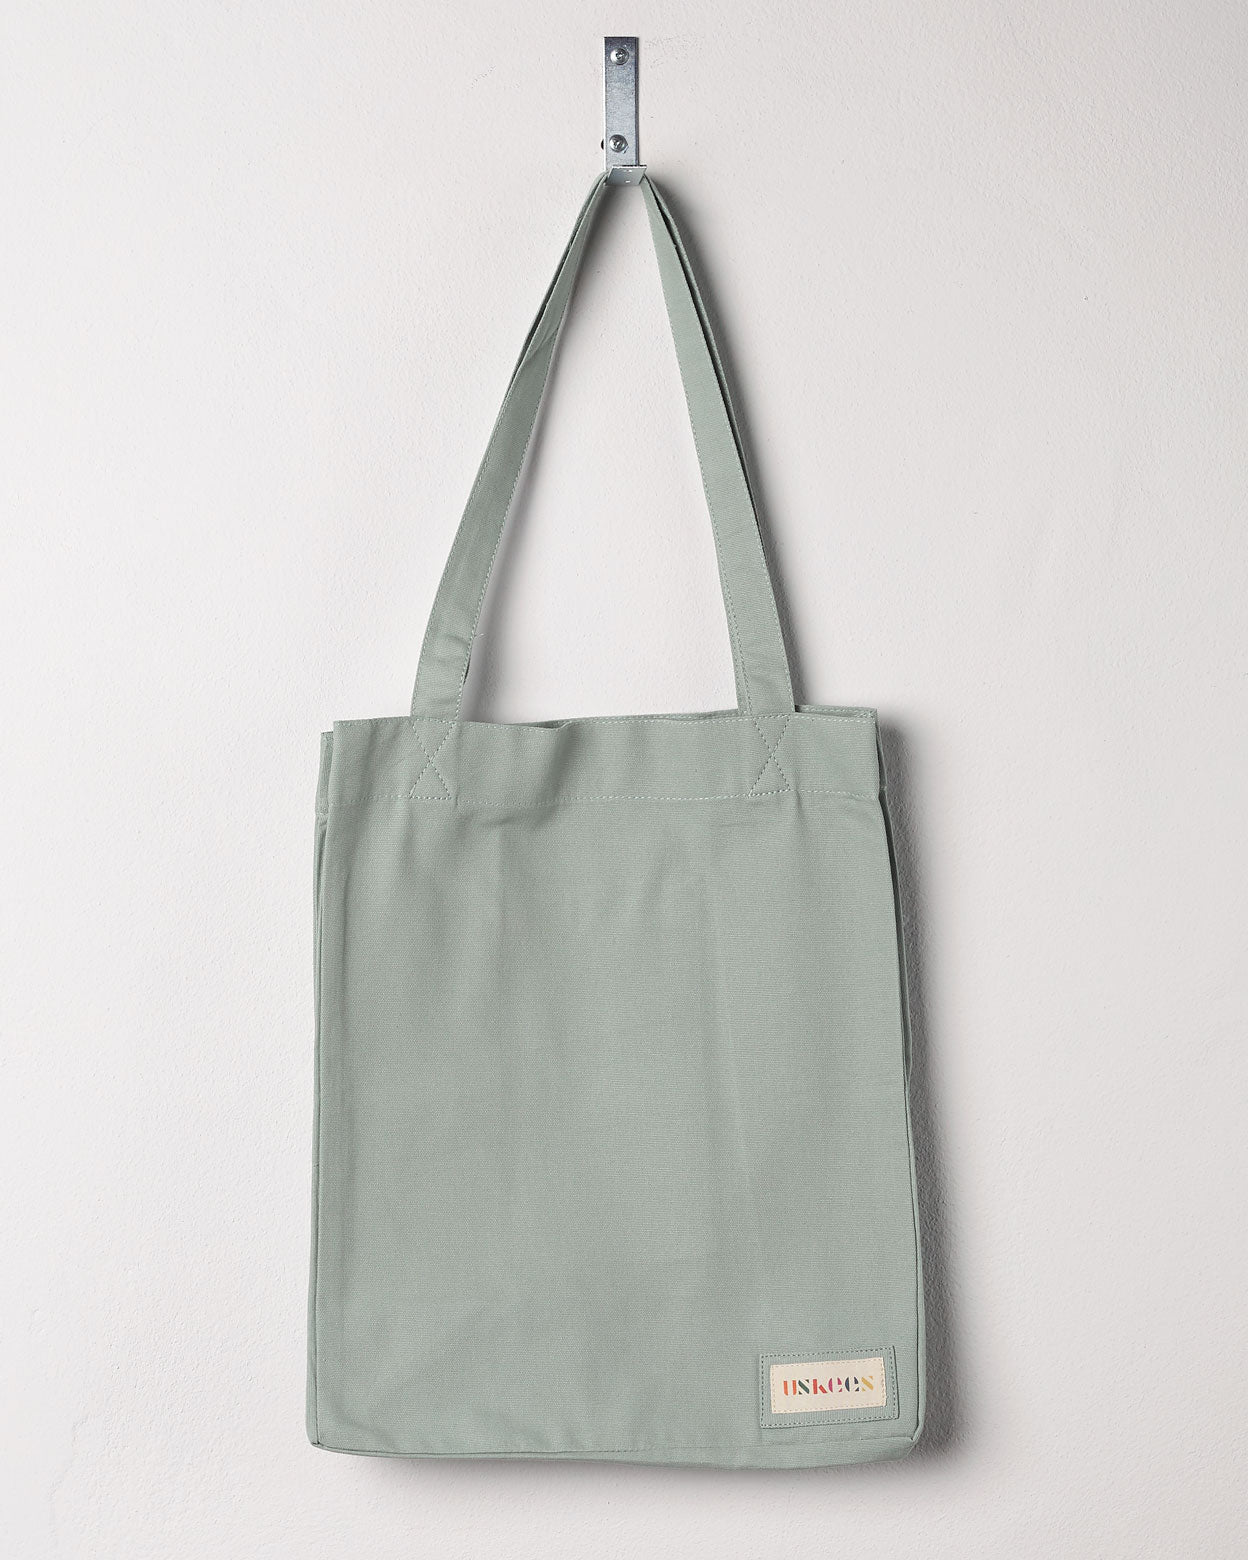 Full front hanging shot of Uskees #4002, small jade tote bag, showing double handles and Uskees woven logo.